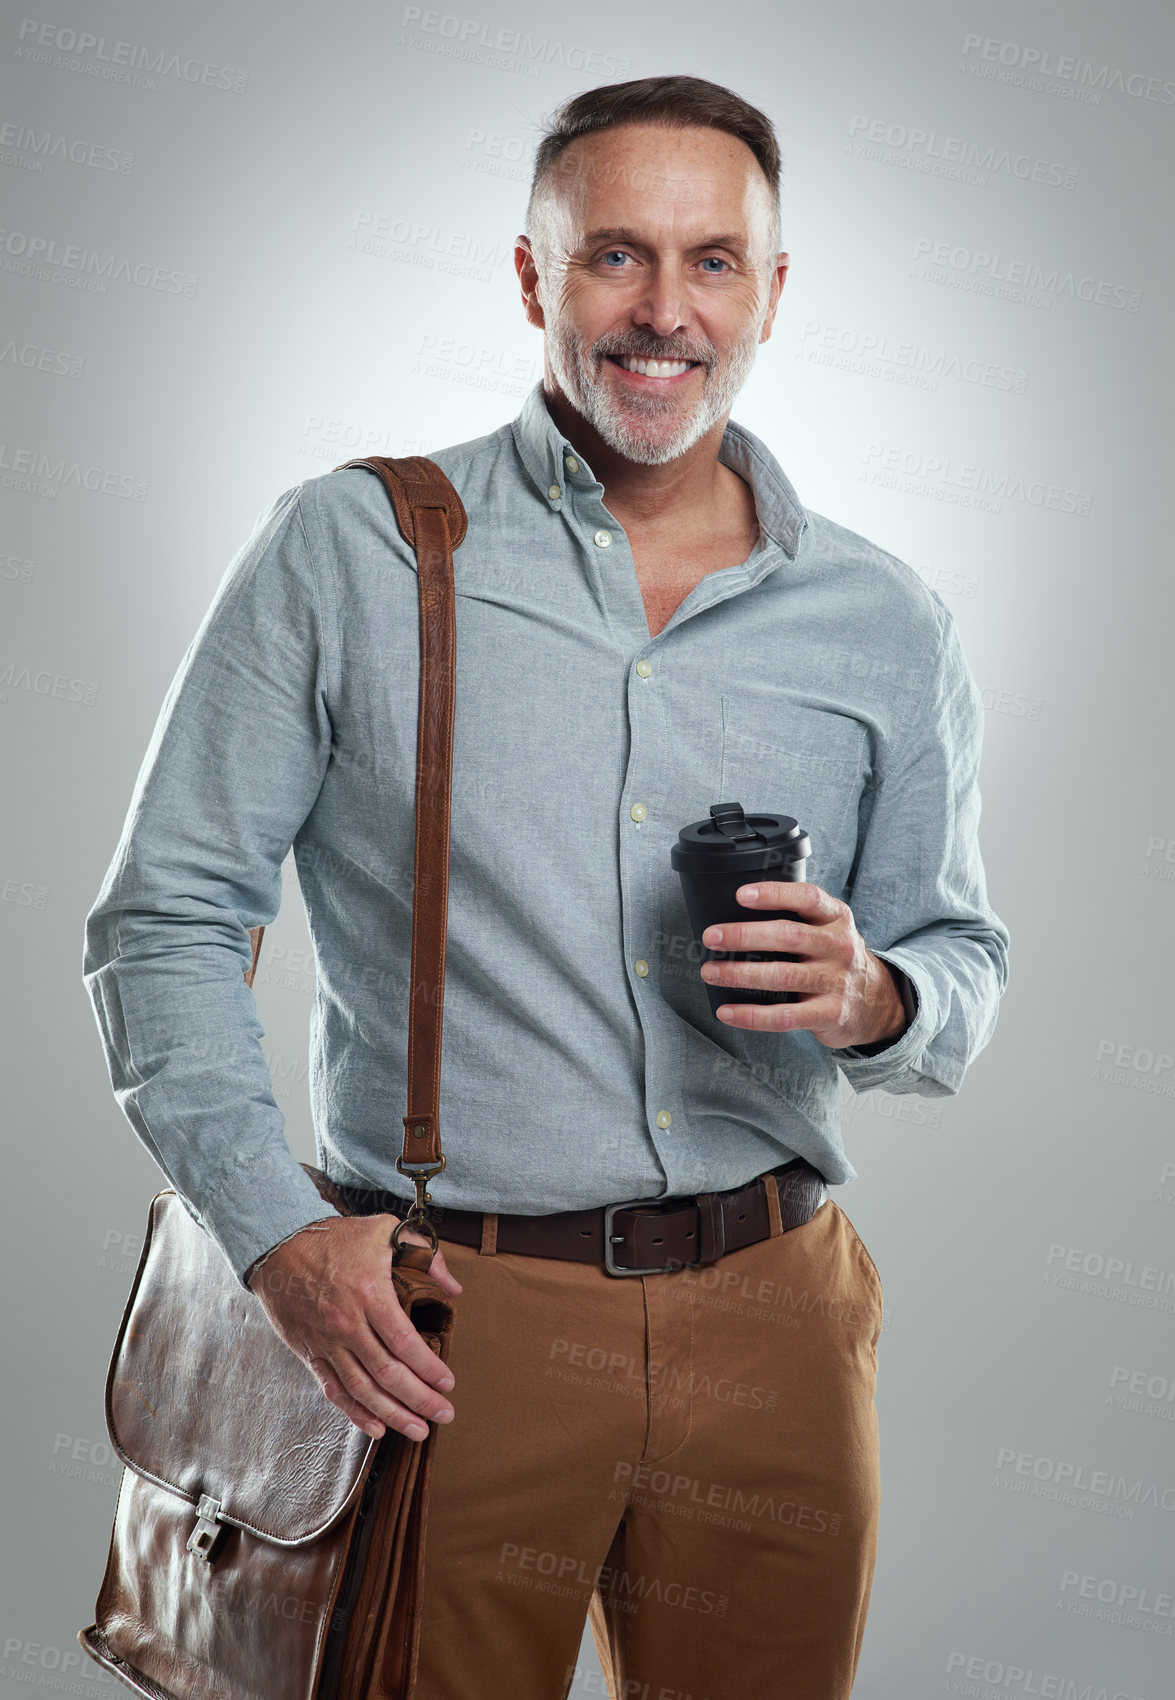 Buy stock photo Studio portrait of a mature man carrying a bag and cup of coffee against a grey background